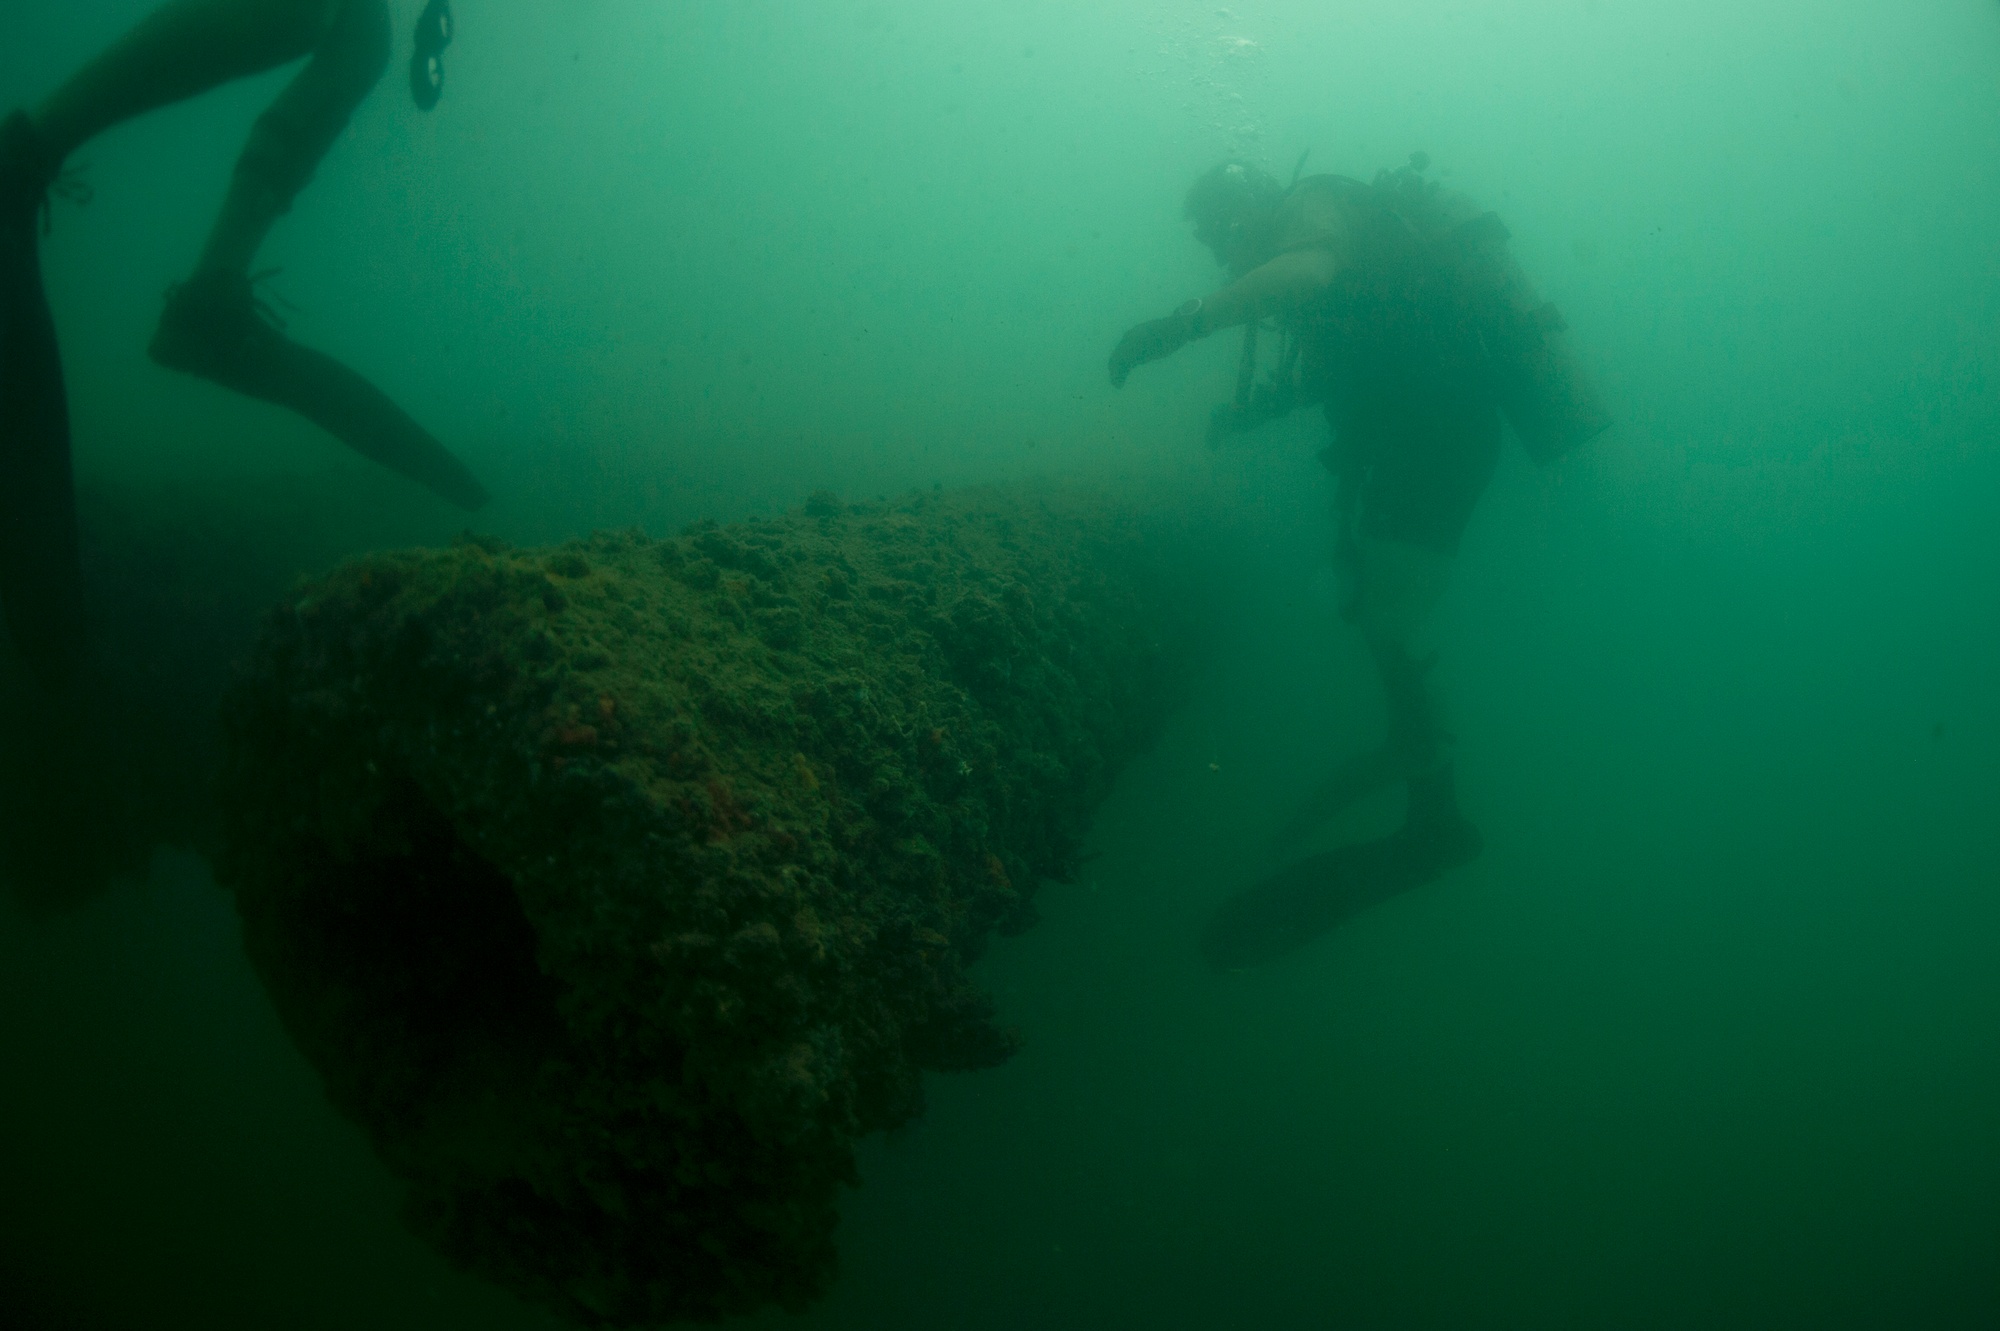 Think & Drink - Wounded Veterans in Parks: Underwater Archaeology and USS  ARIZONA